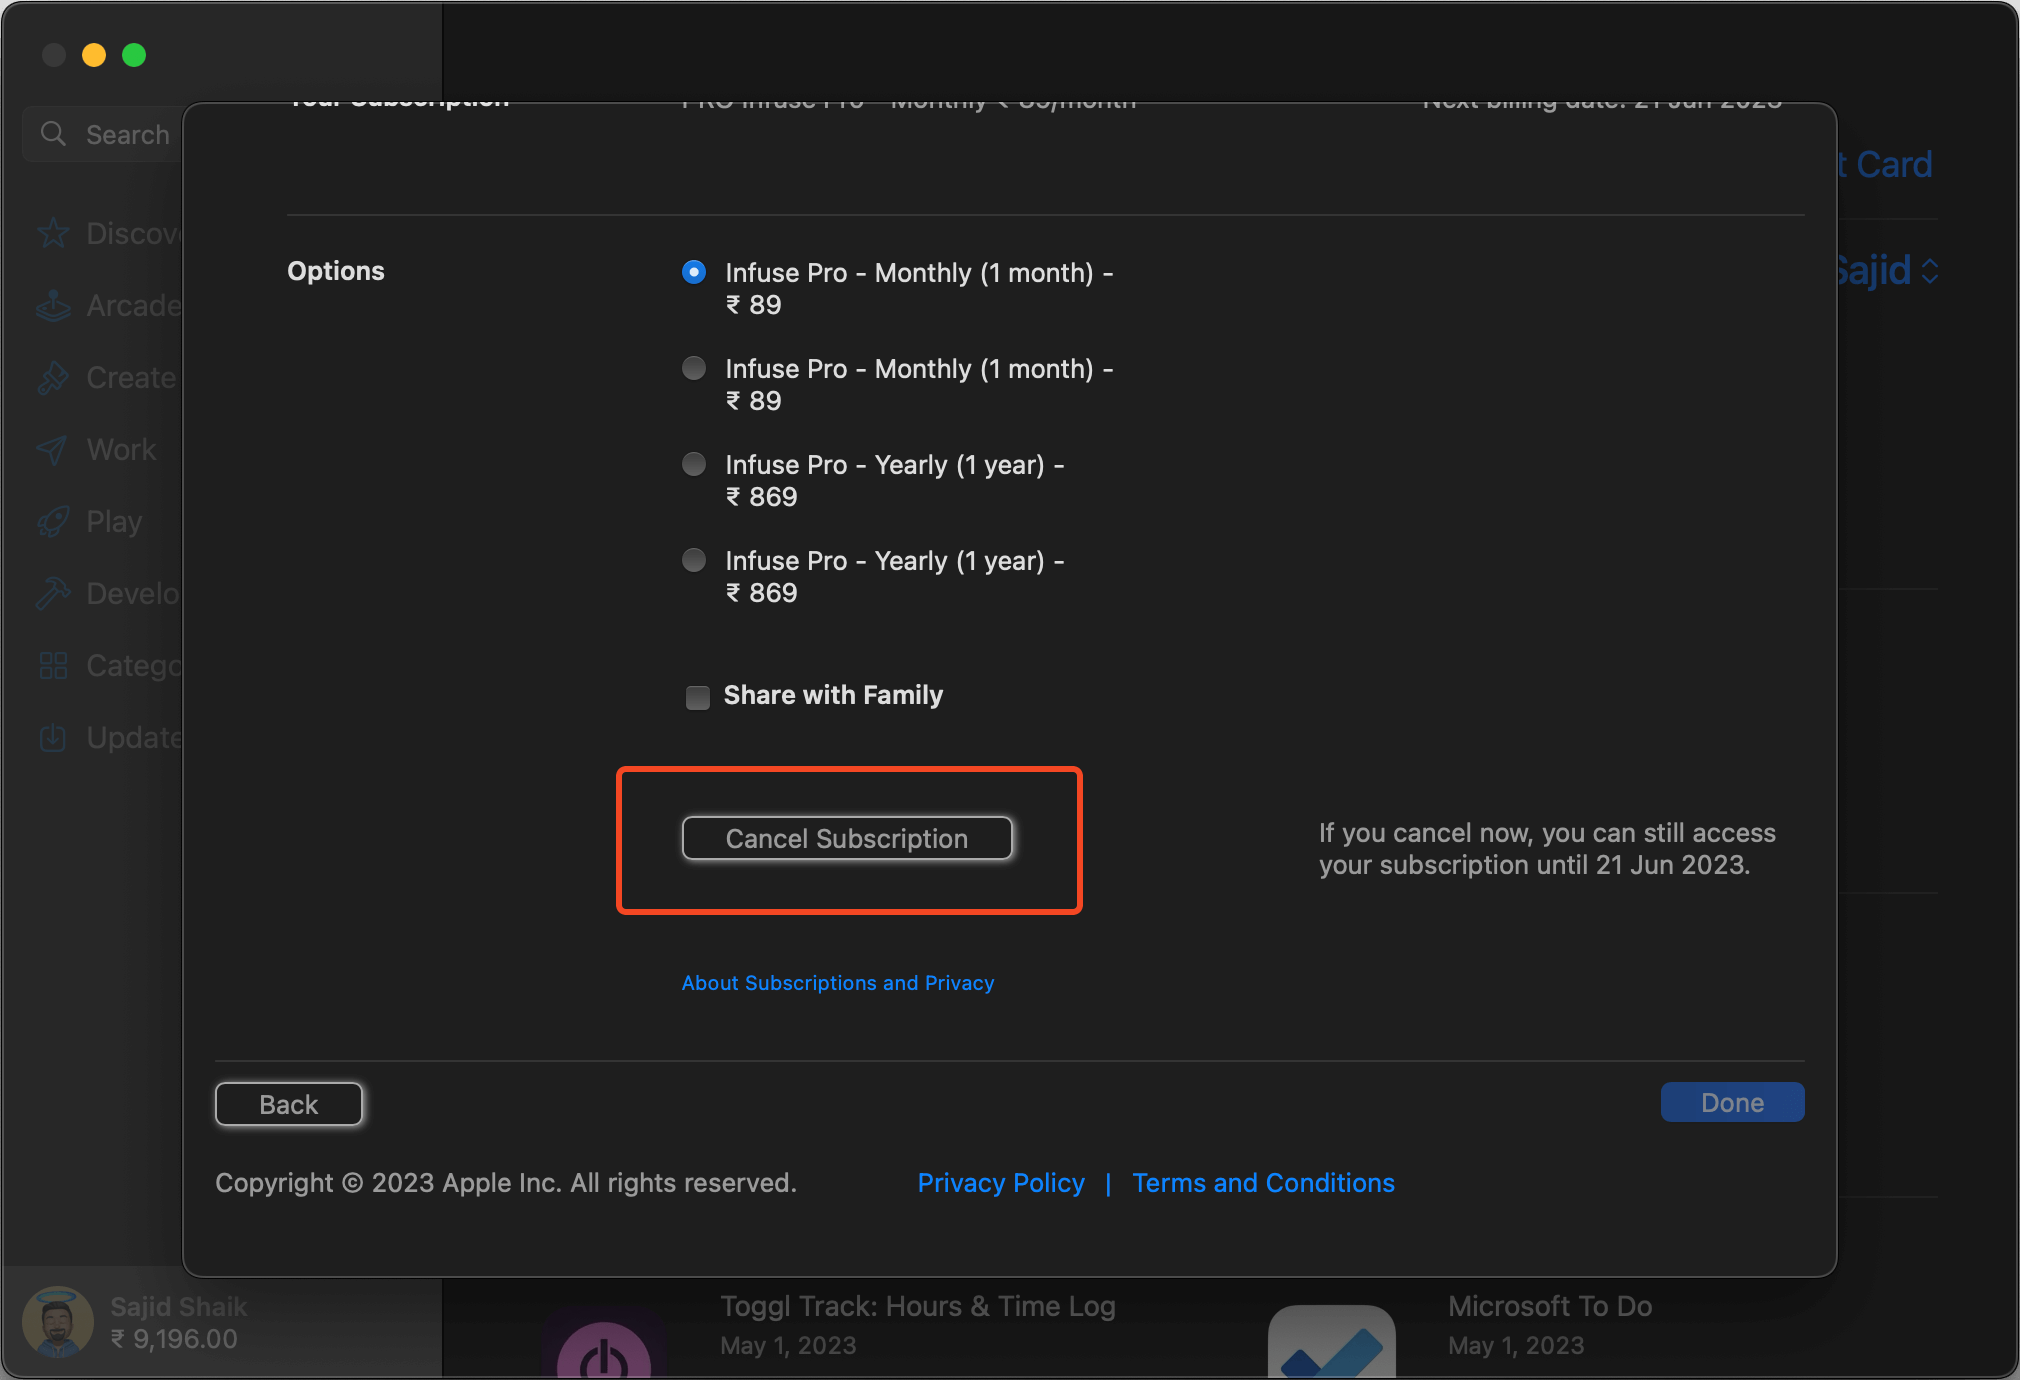 Select Cancel Subscription to cancel your subscription